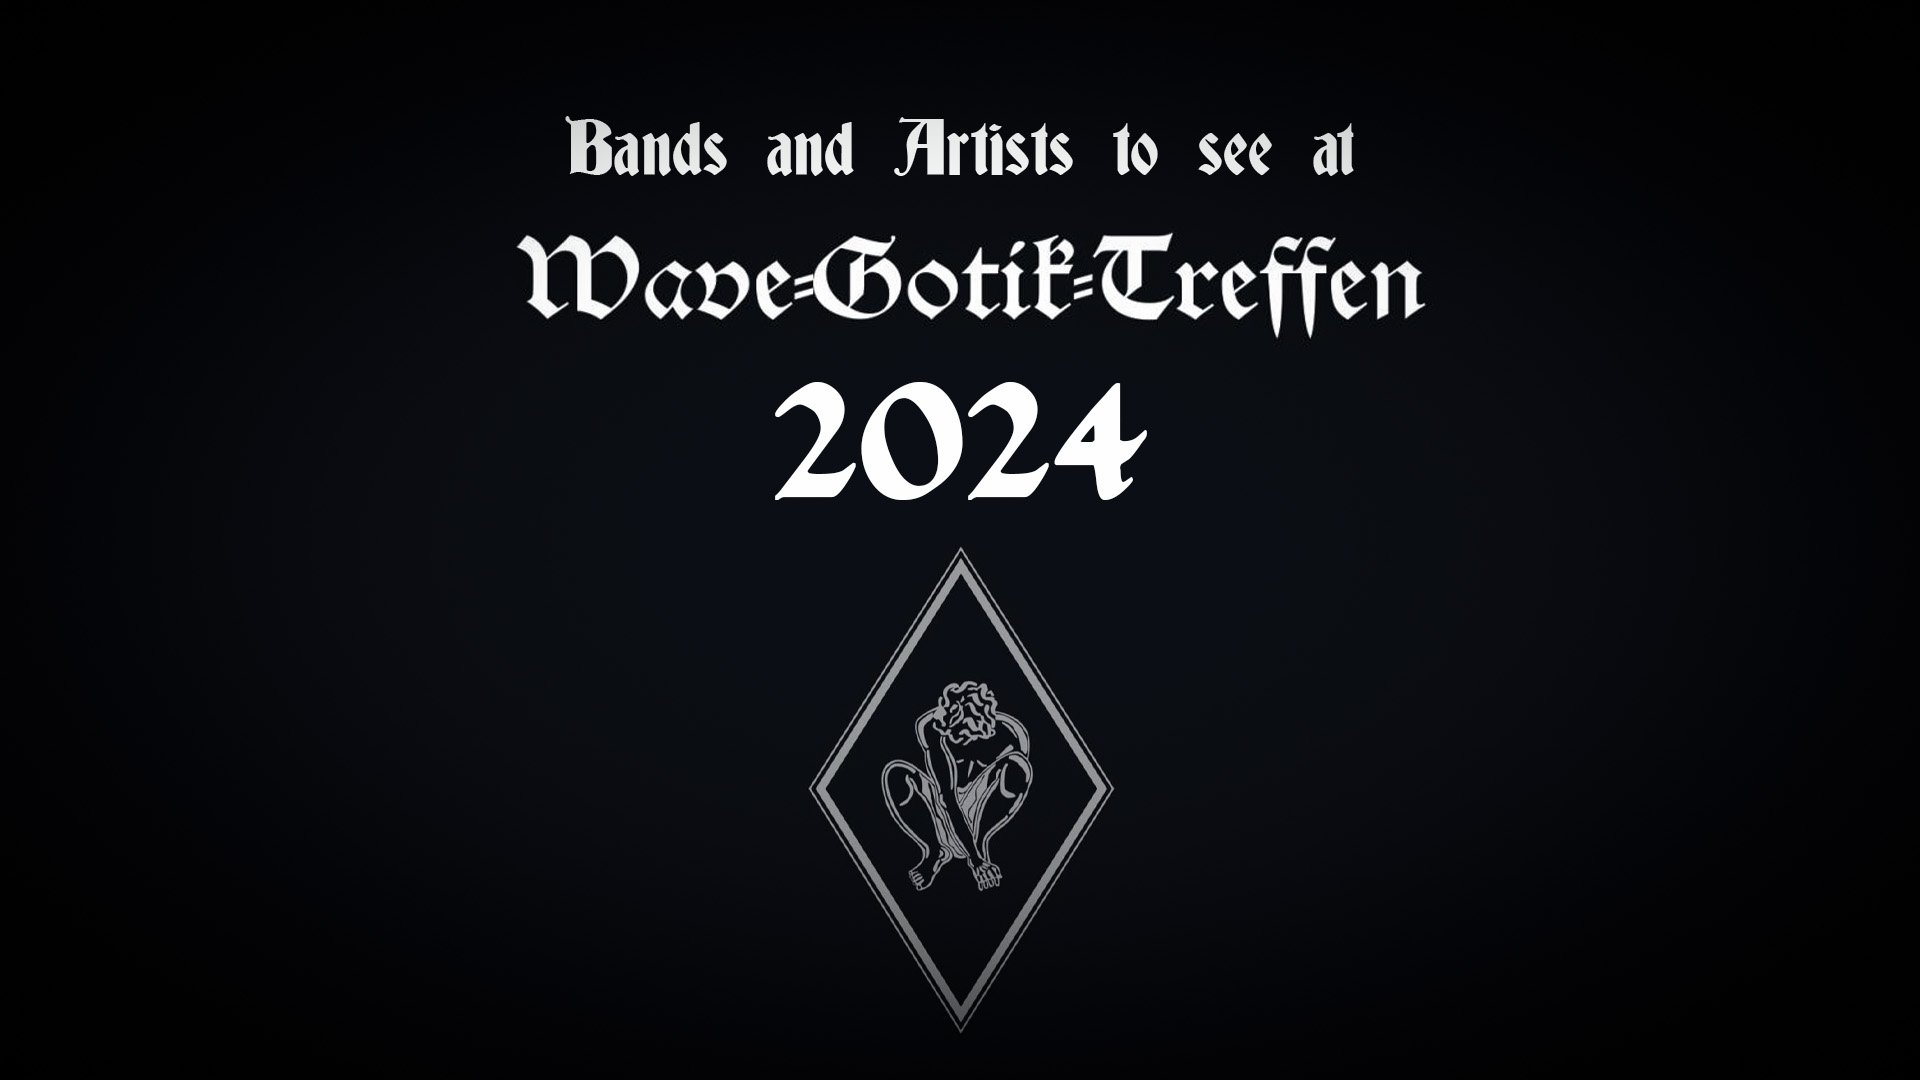 Bands and Artists to See at Wave Gotik Treffen 2024 — Post-Punk.com